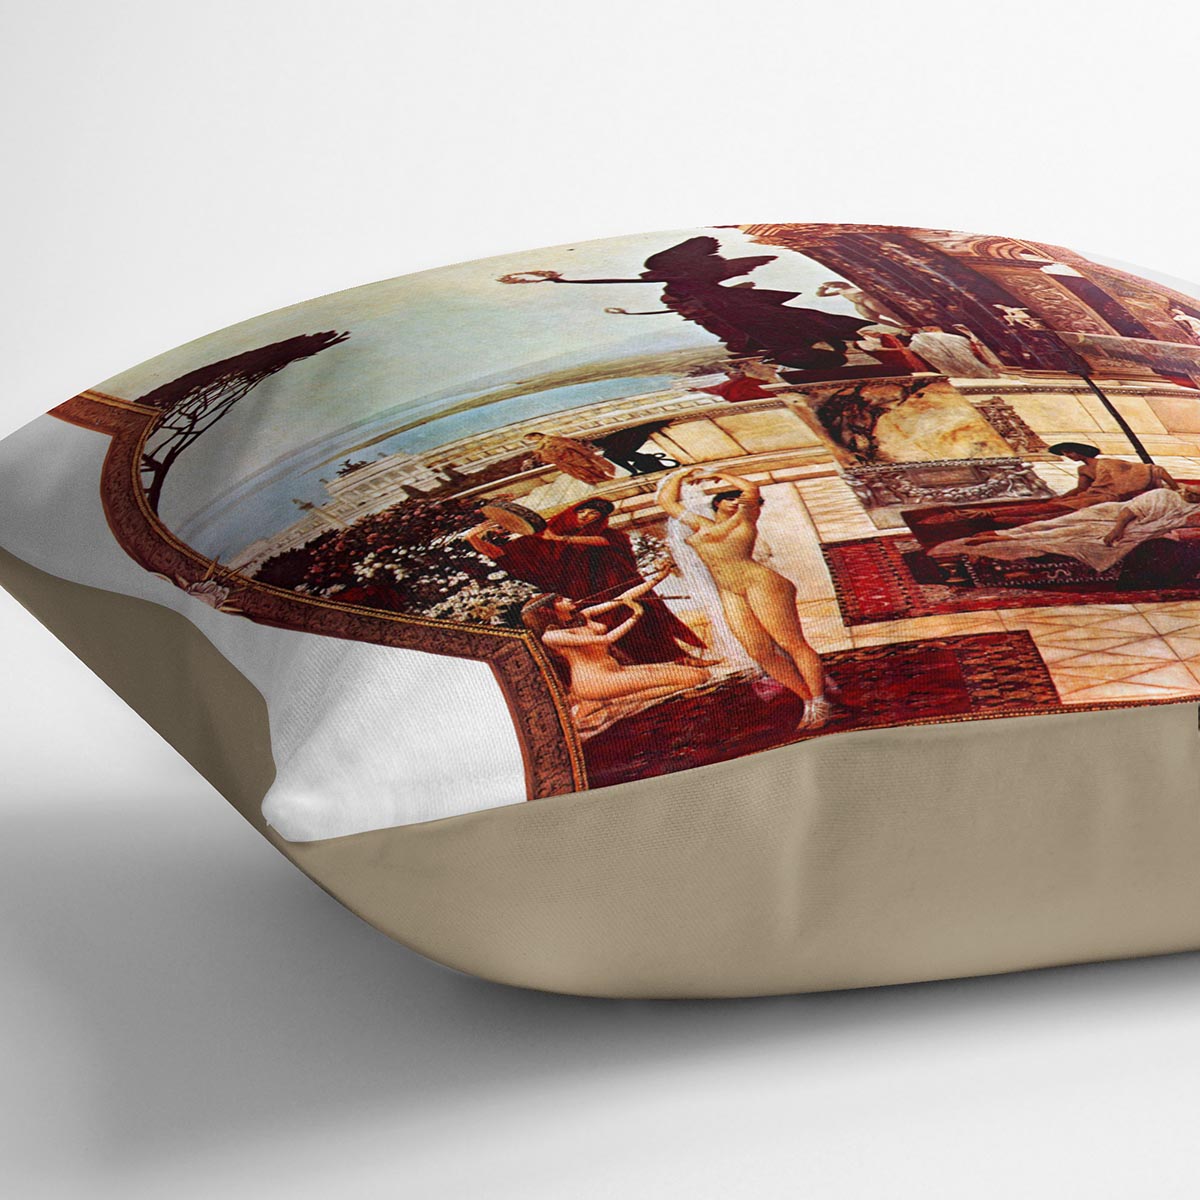 The Theatre of Taormina by Klimt Cushion